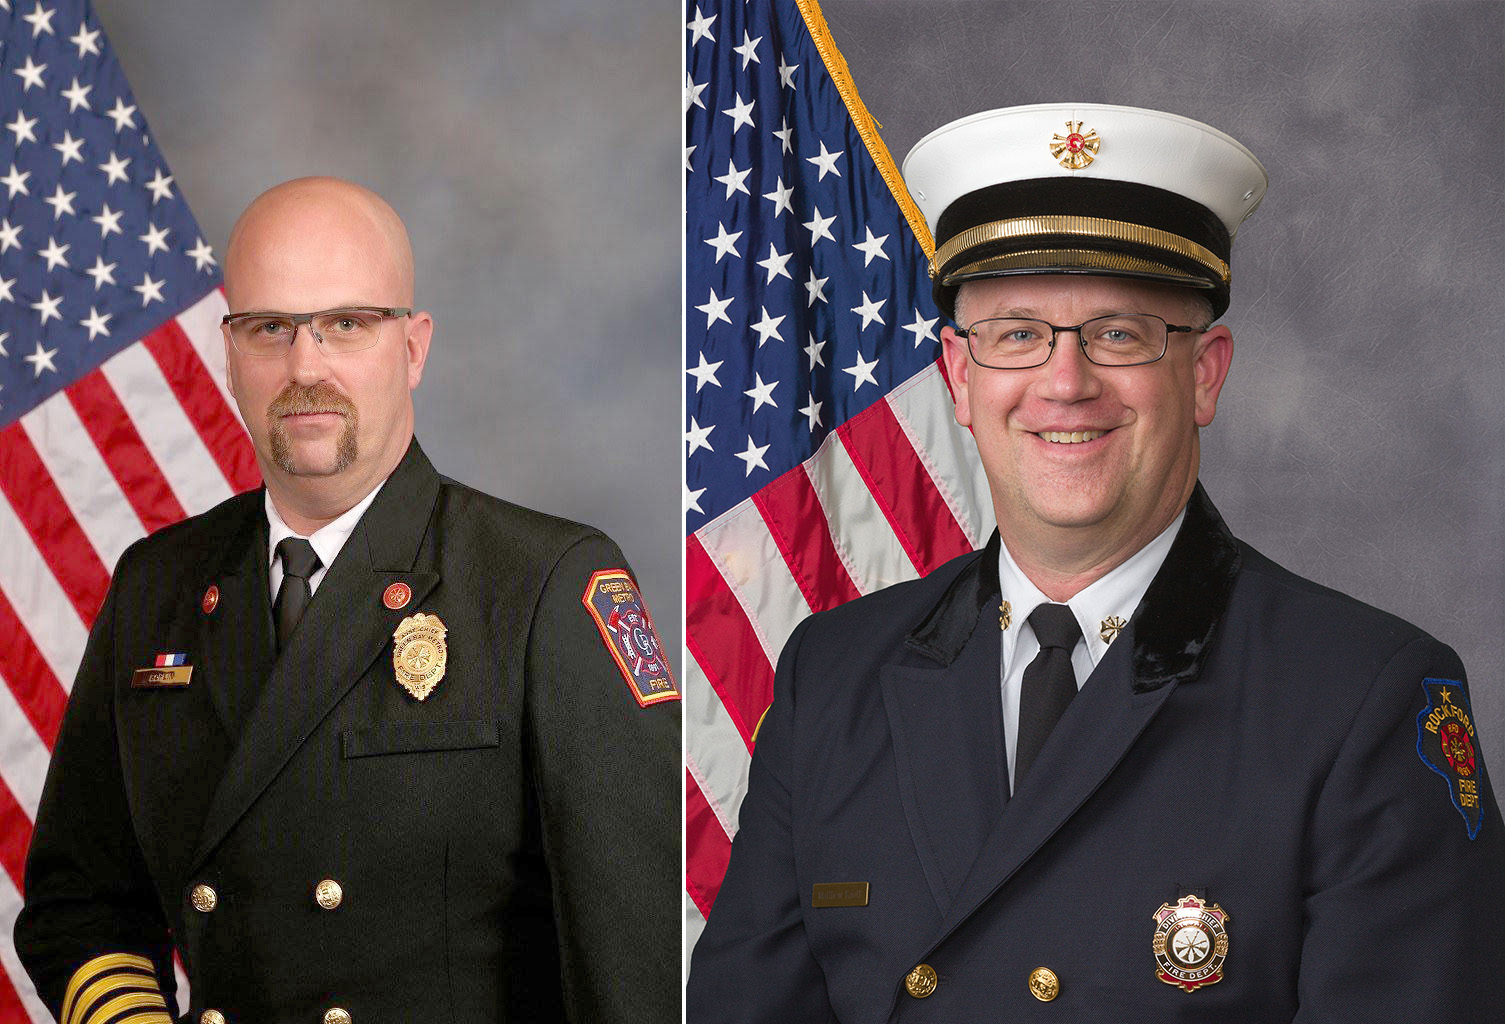 Green Bay Police & Fire Commission close to naming new fire chief